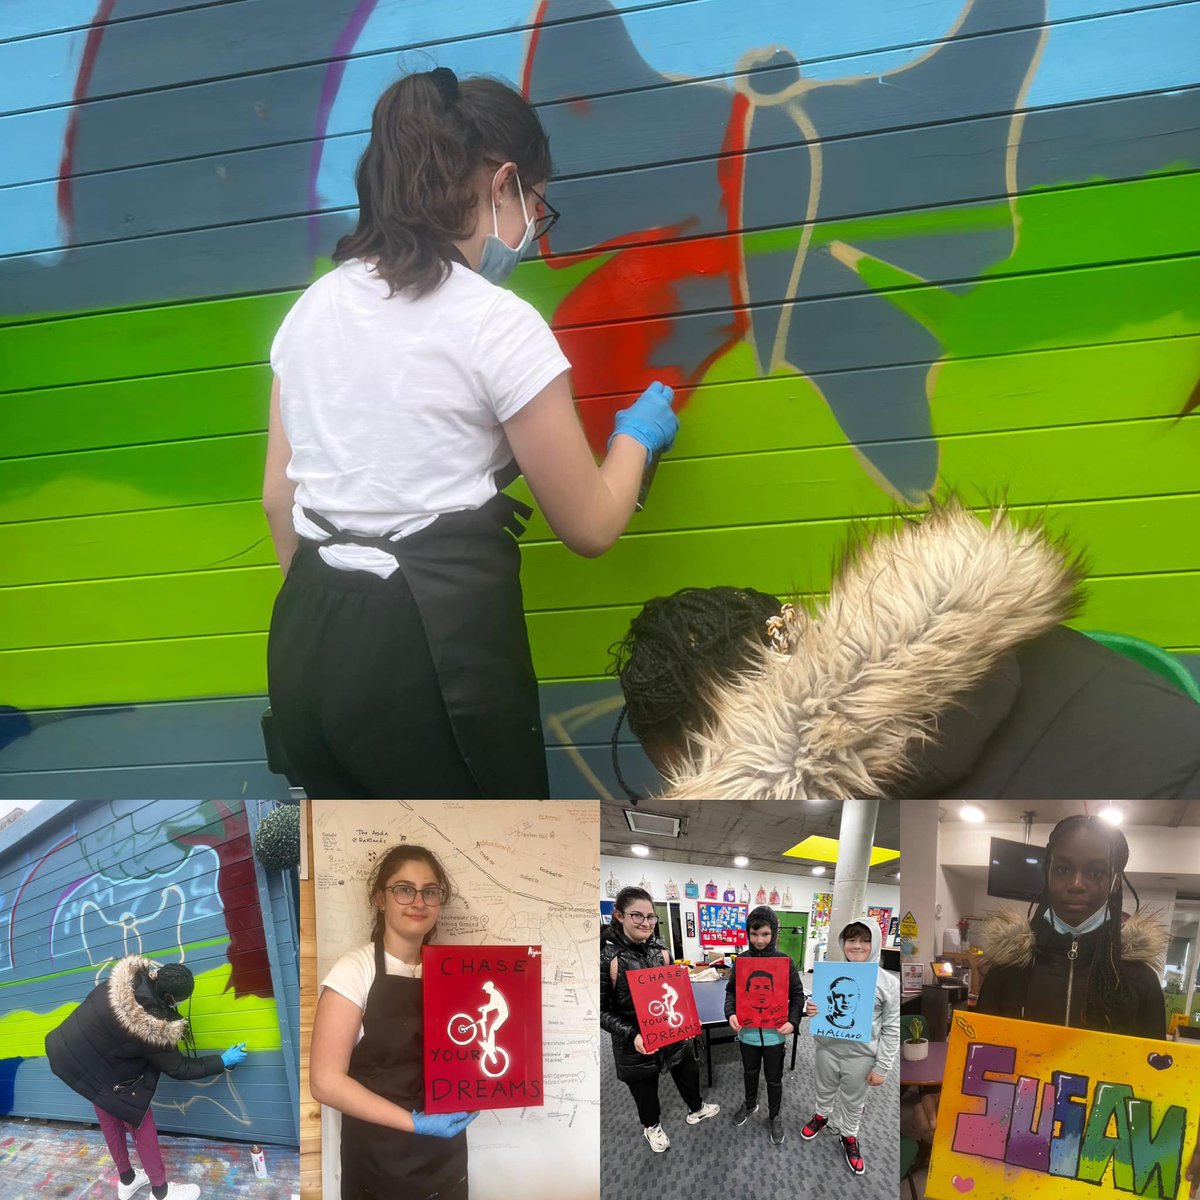 Easter half term fun! Well done to Chelsea & her team for all their hard work putting on such a great two weeks of fun! #HAF #manchestersettlement #together #youth #emypp #youngpeople #manchester